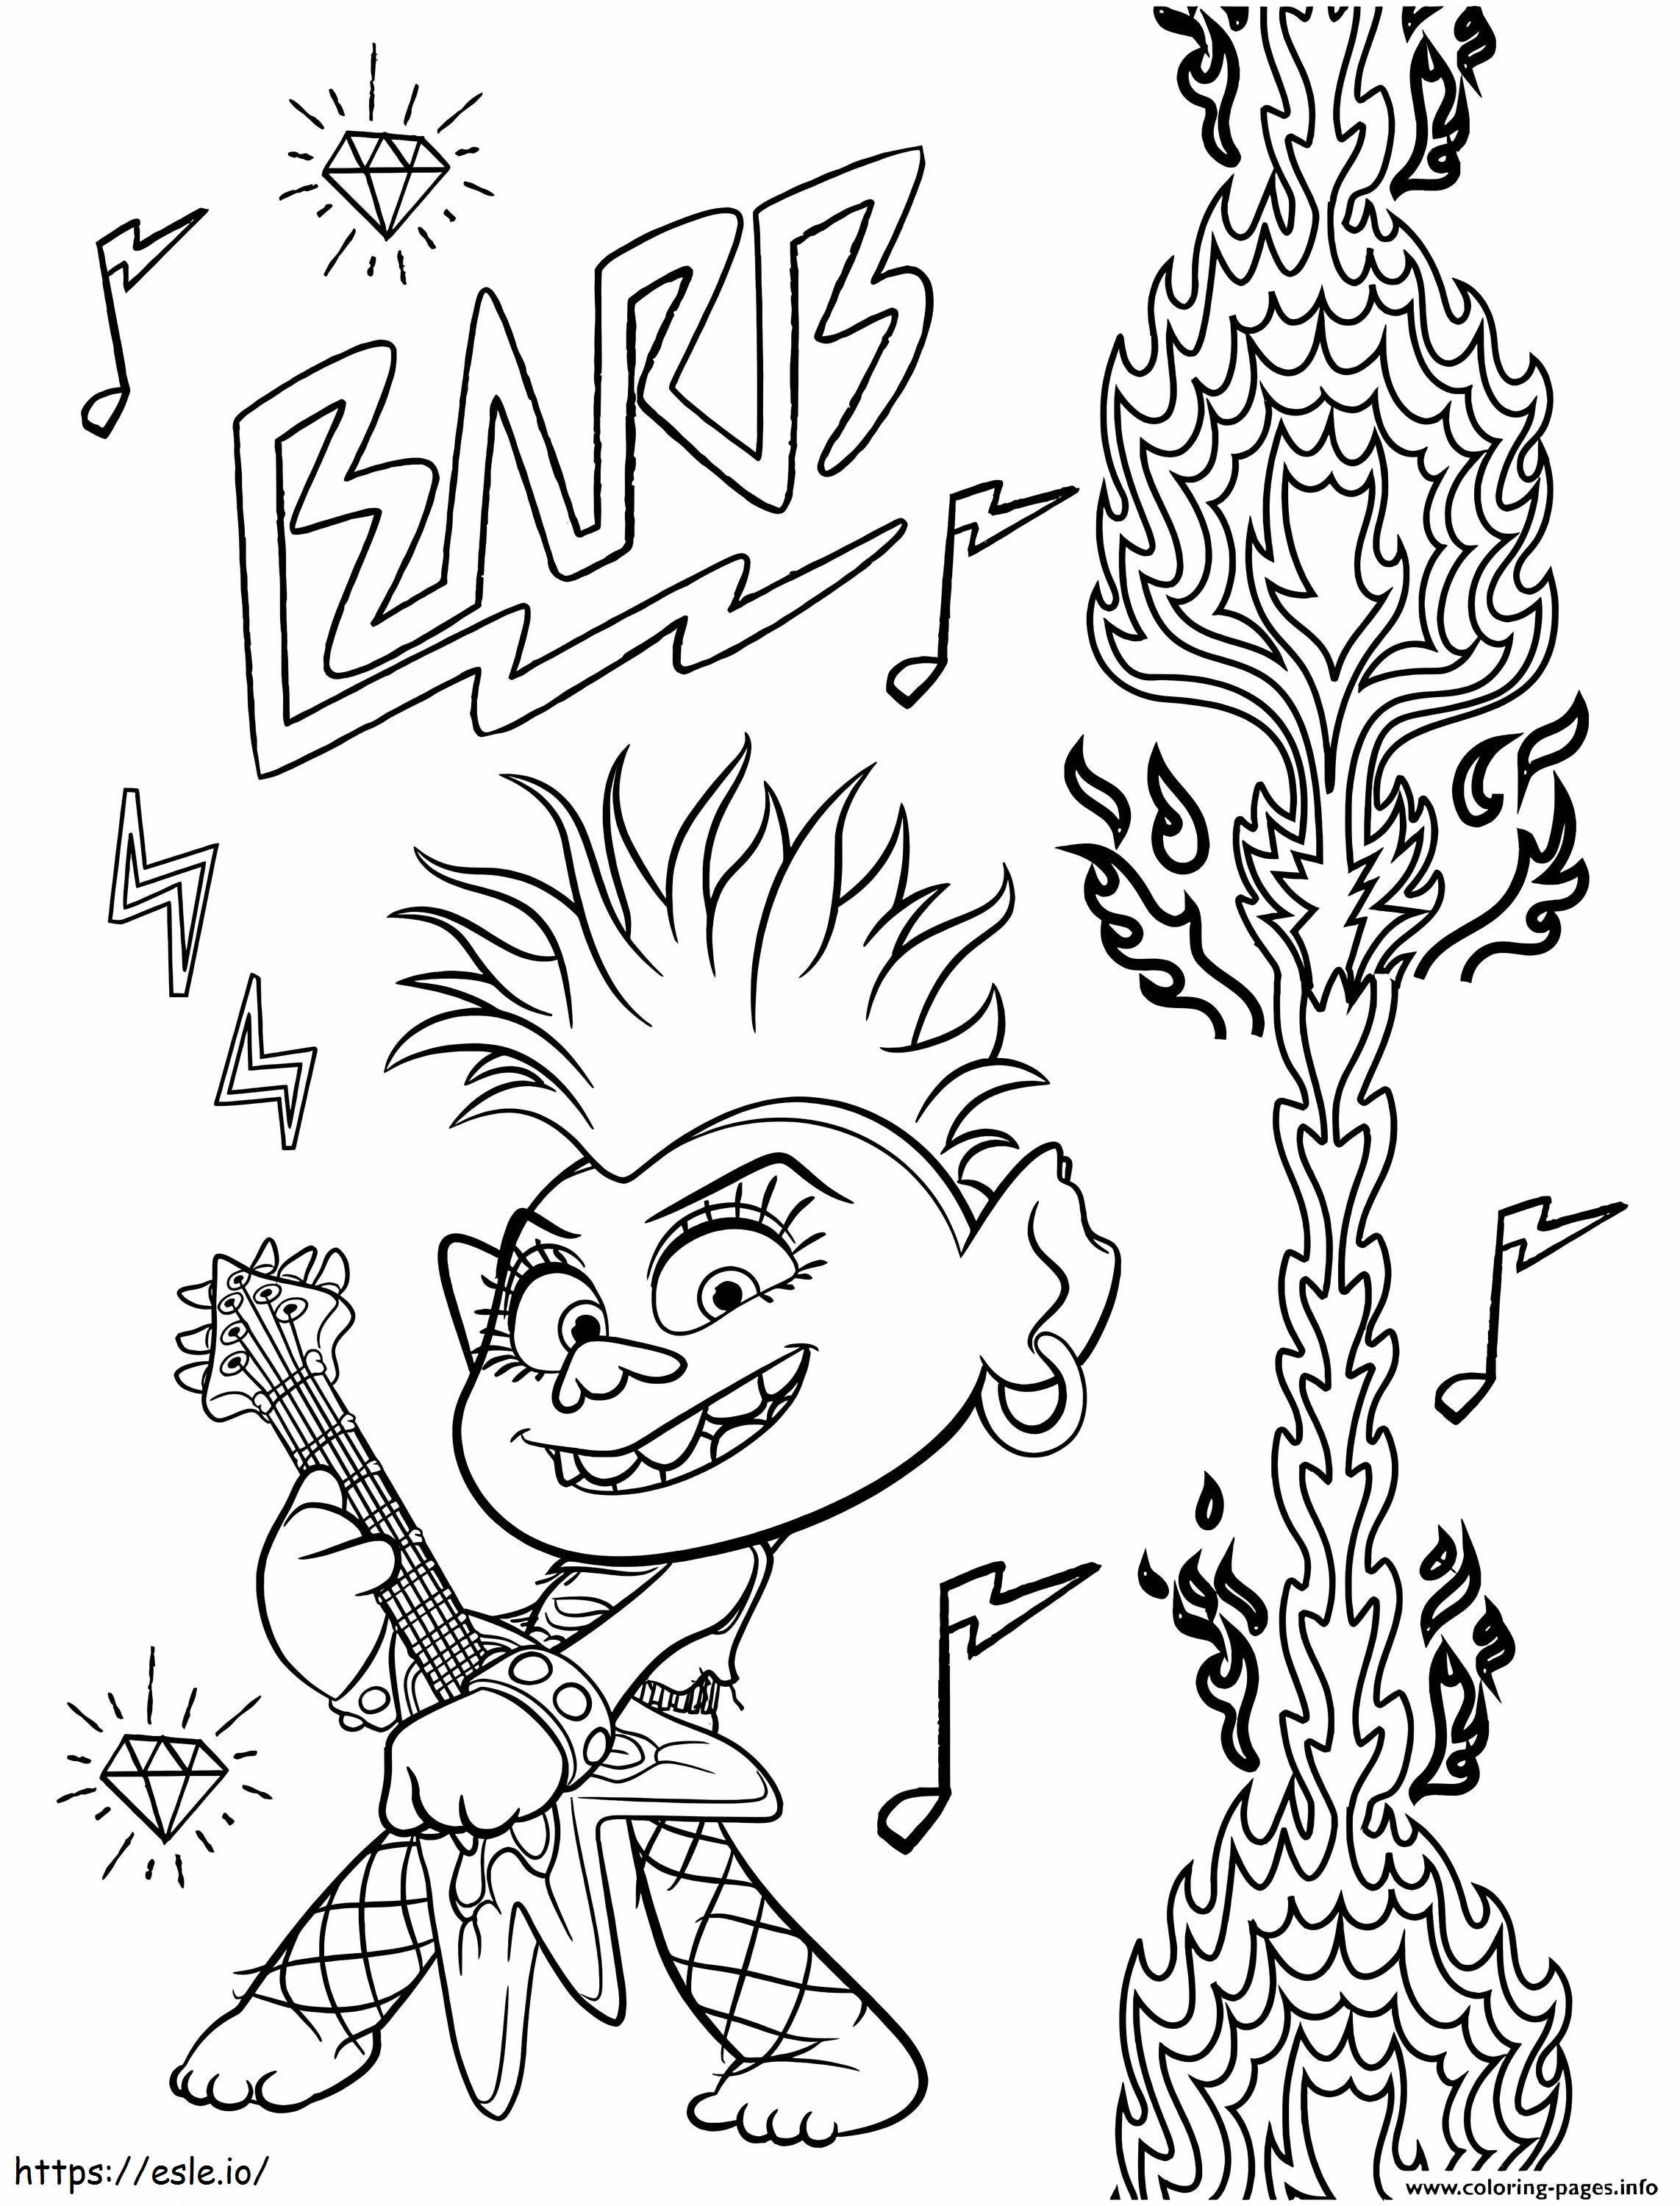 Queen Barb Trolls coloring page